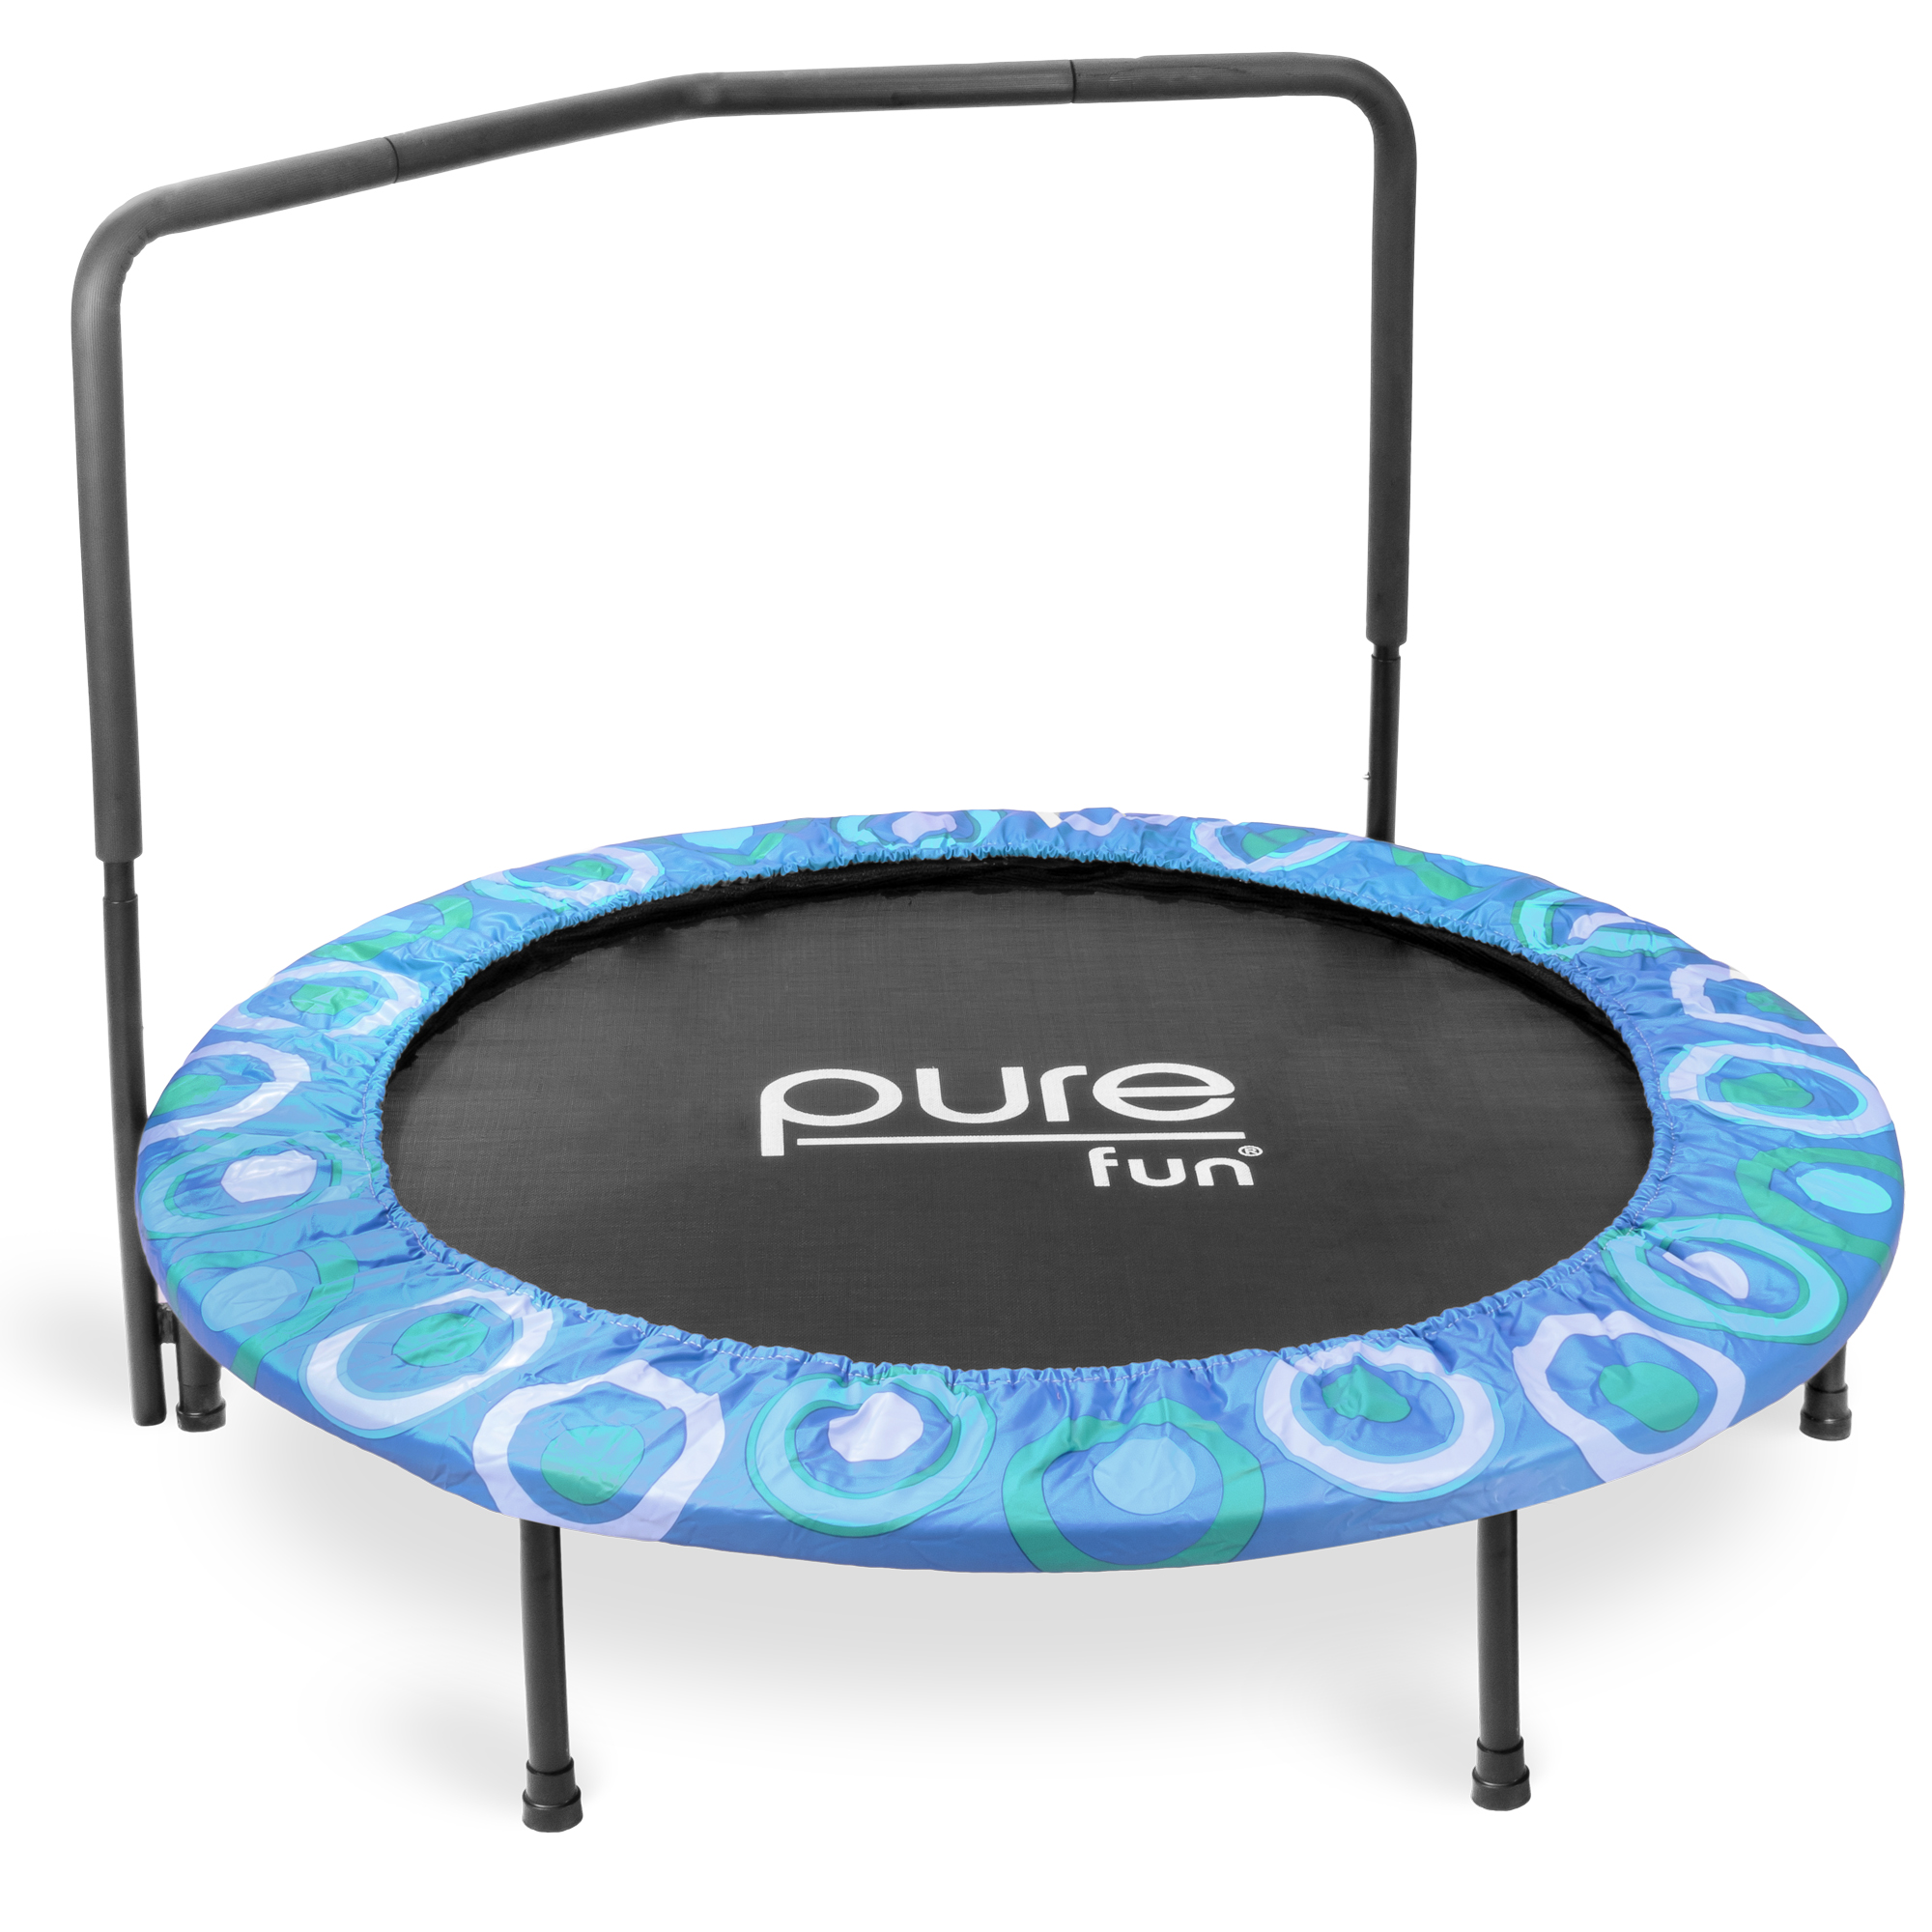 Pure Fun 48-Inch Super Jumper Kids Trampoline with Handrail, Blue, 100lb Weight Limit - image 1 of 6